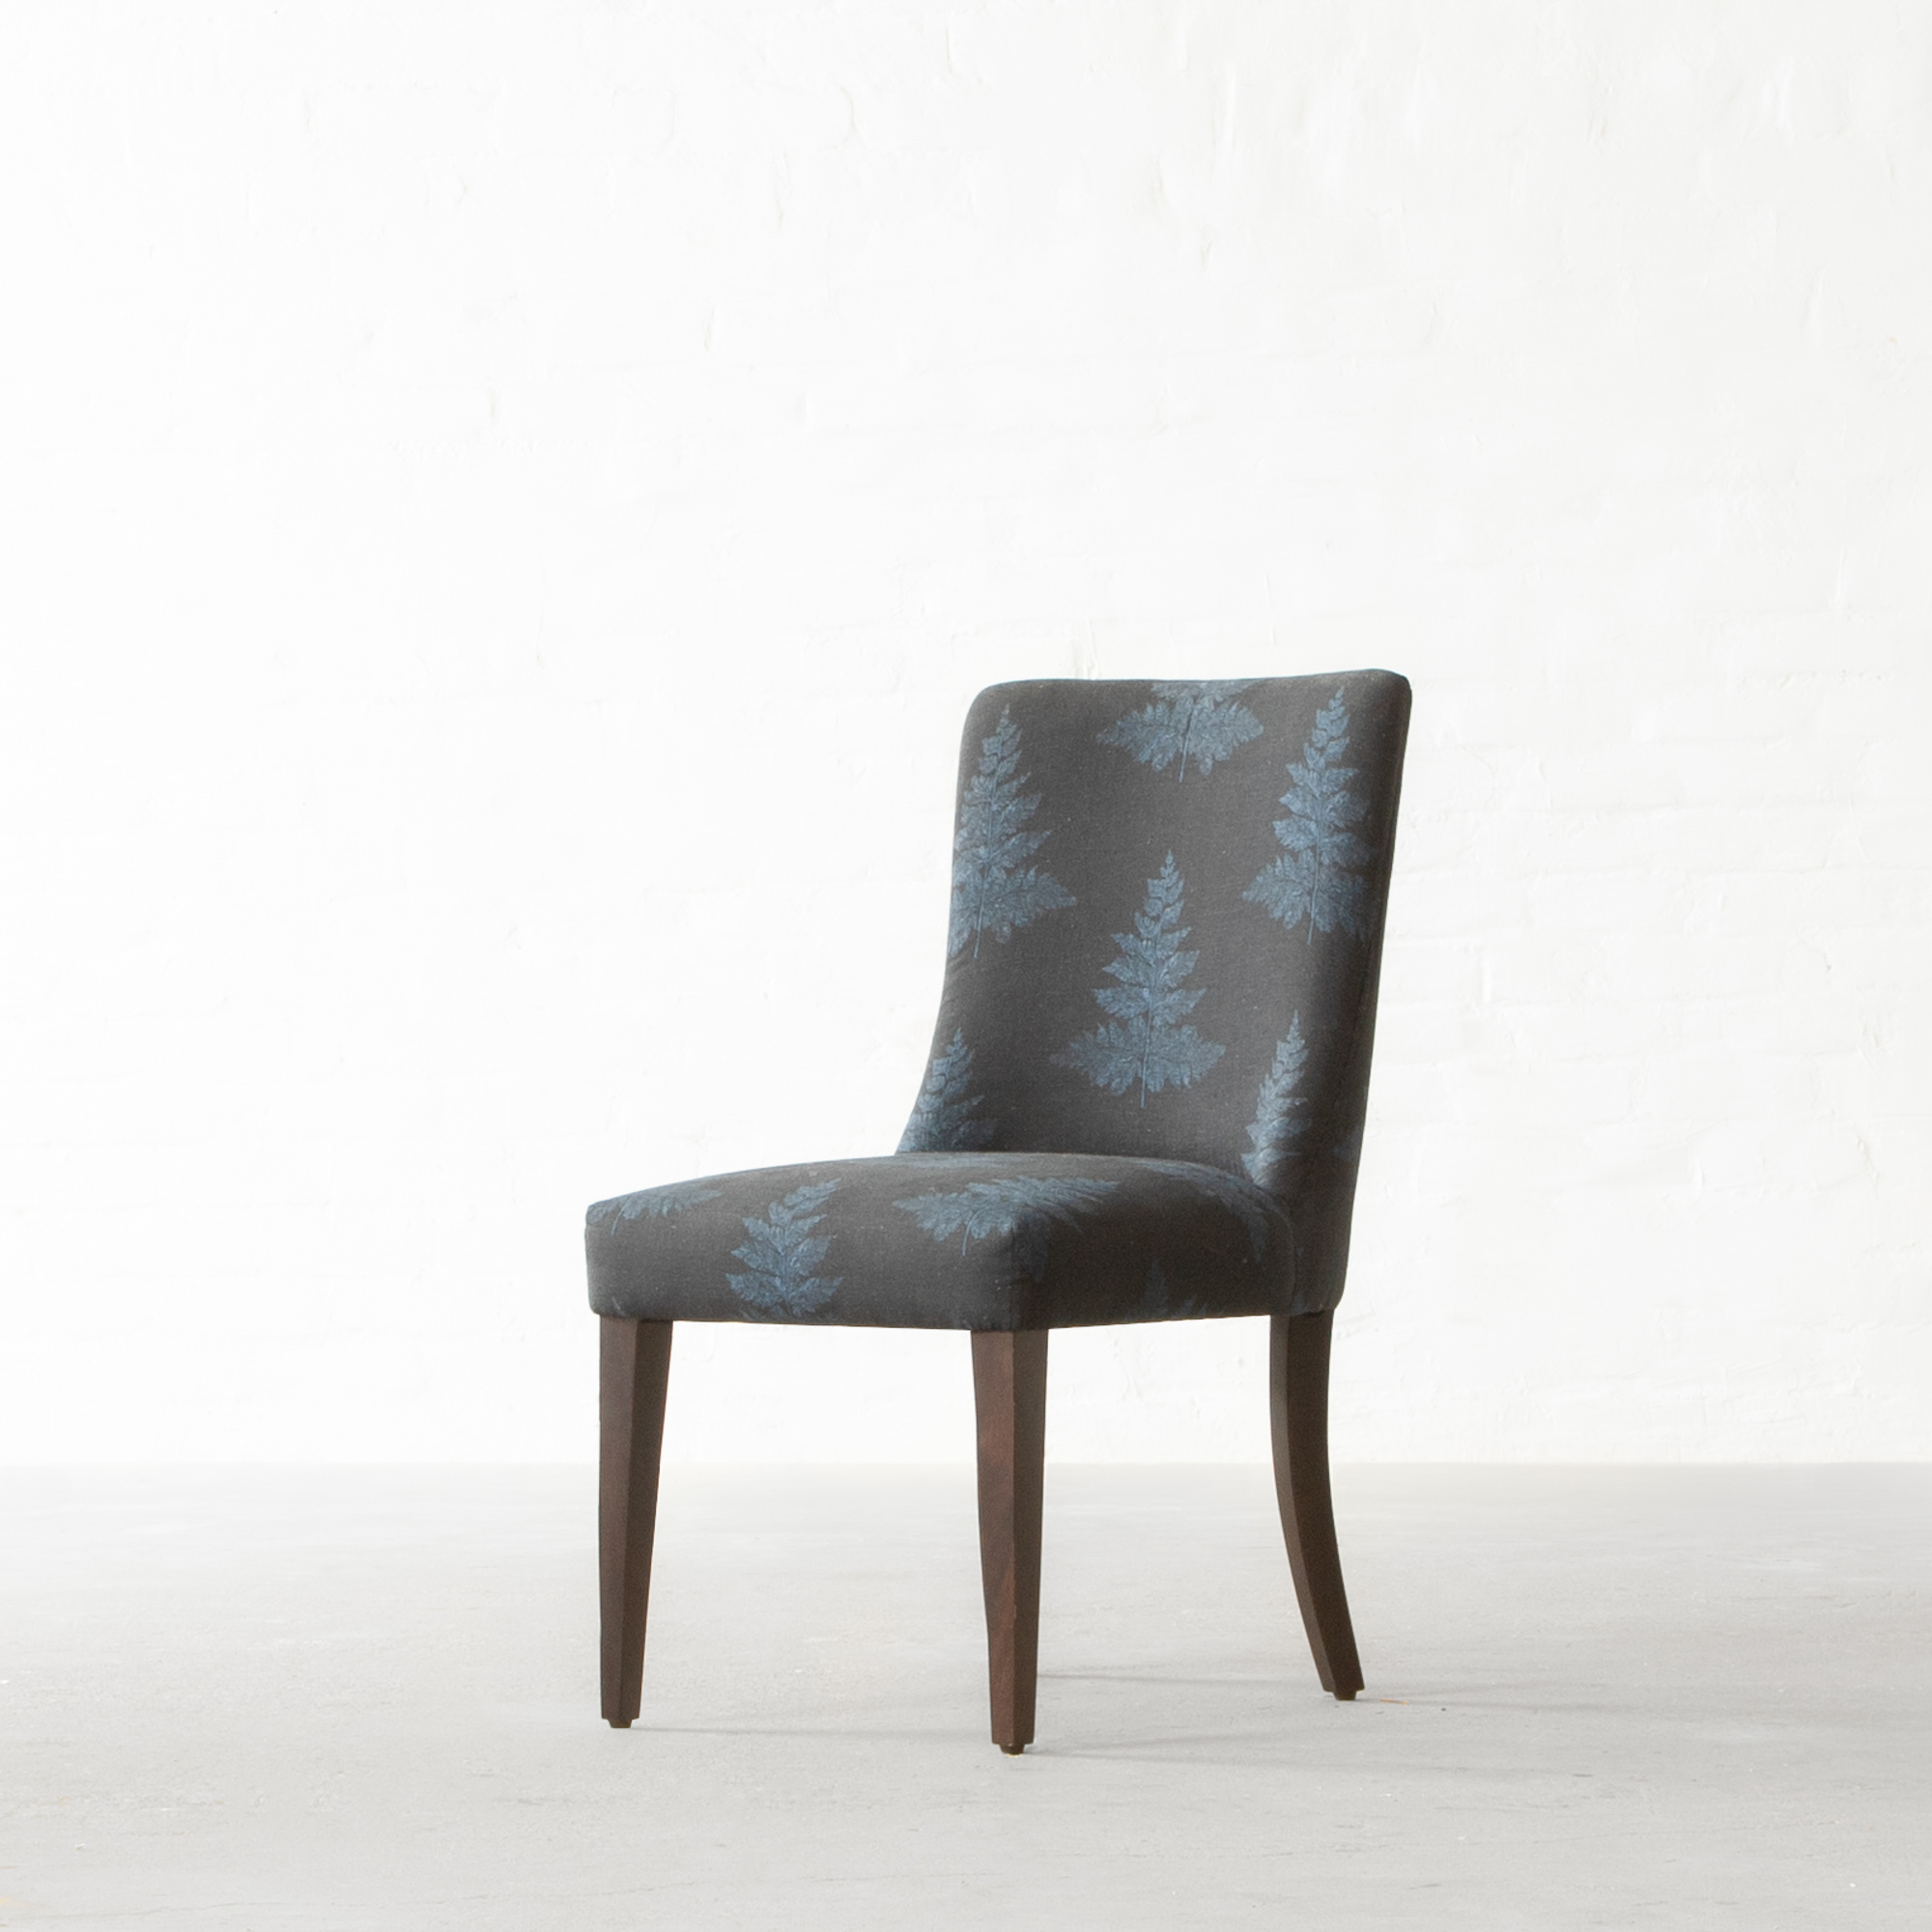 Athens Dining Chair